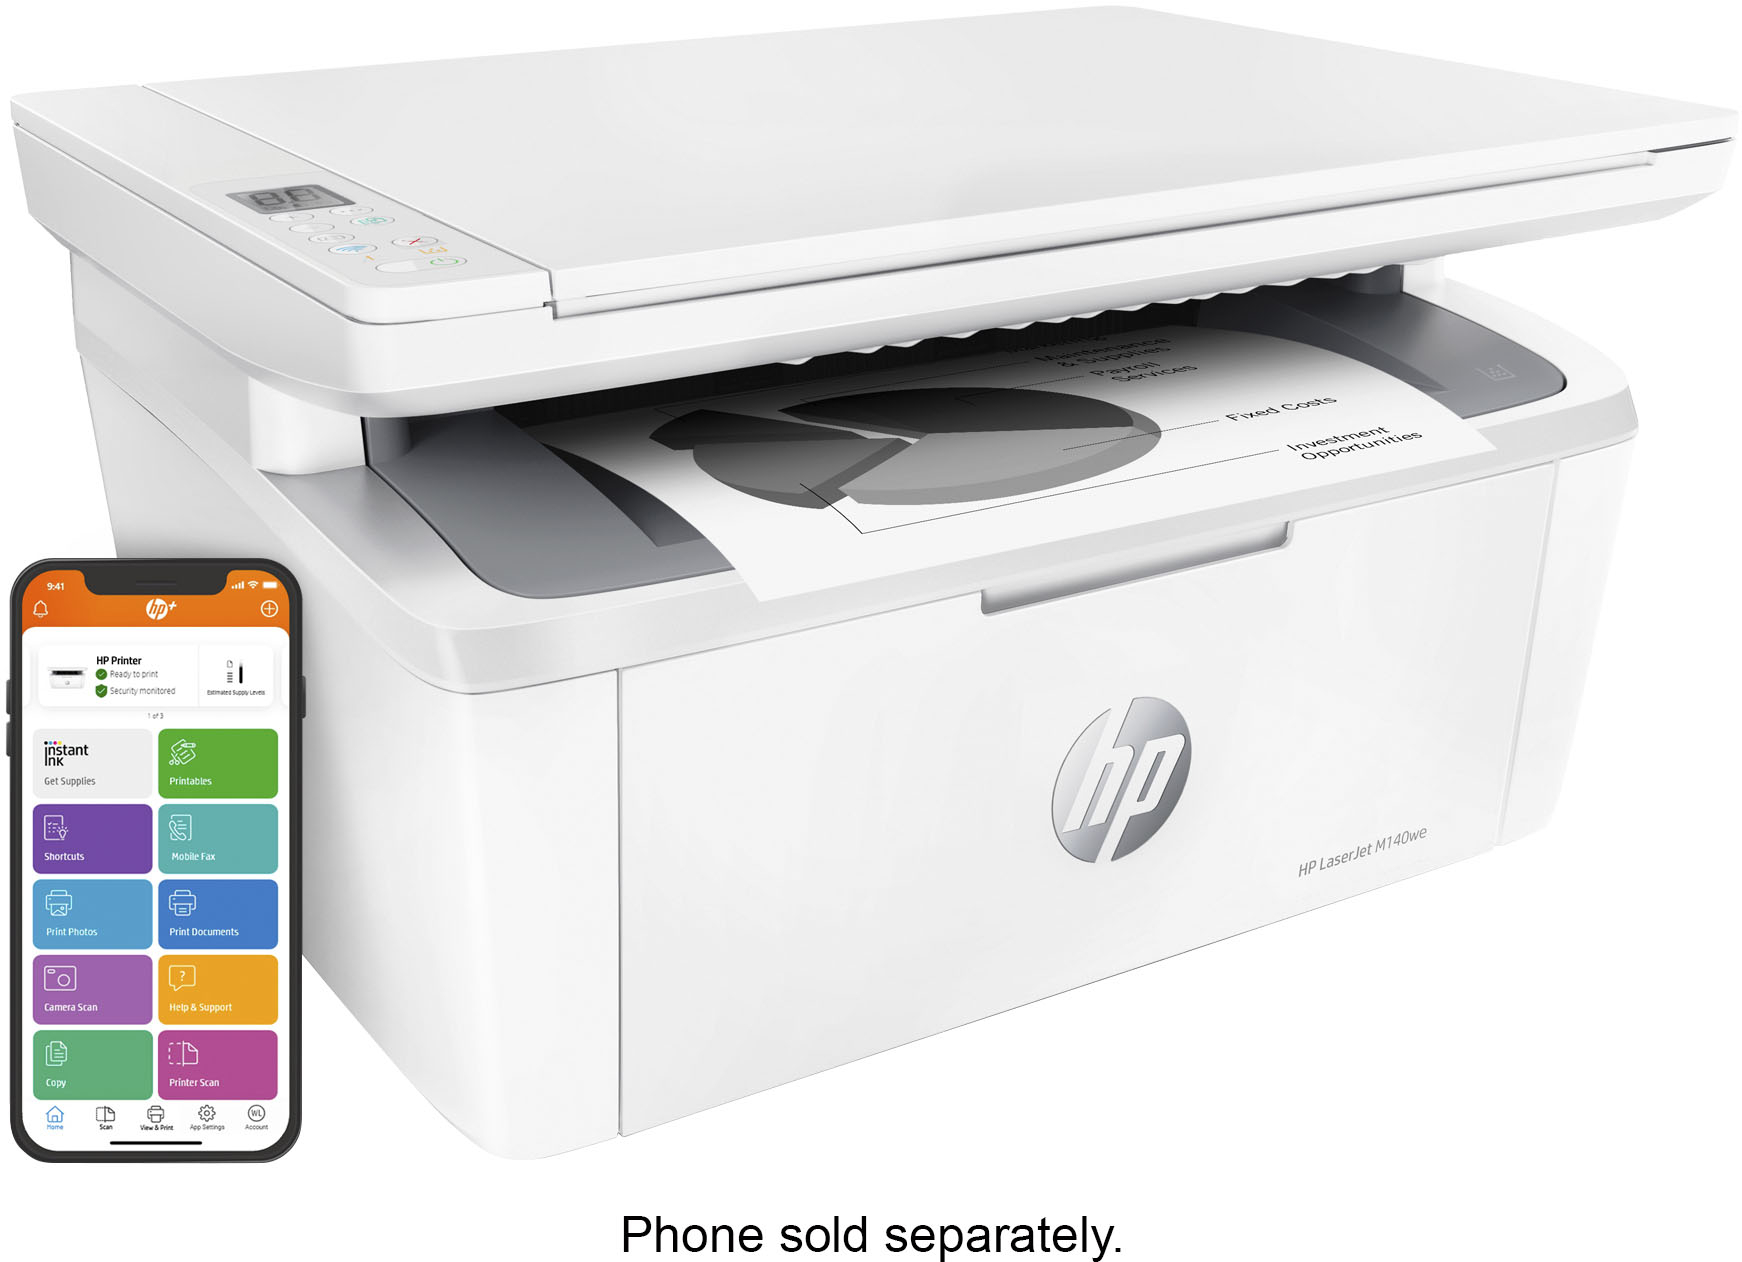 Beliebte Artikel HP LaserJet M140we Wireless Black months and with White with Ink Buy of M140we White Instant included - Printer 6 HP+ LaserJet Laser Best